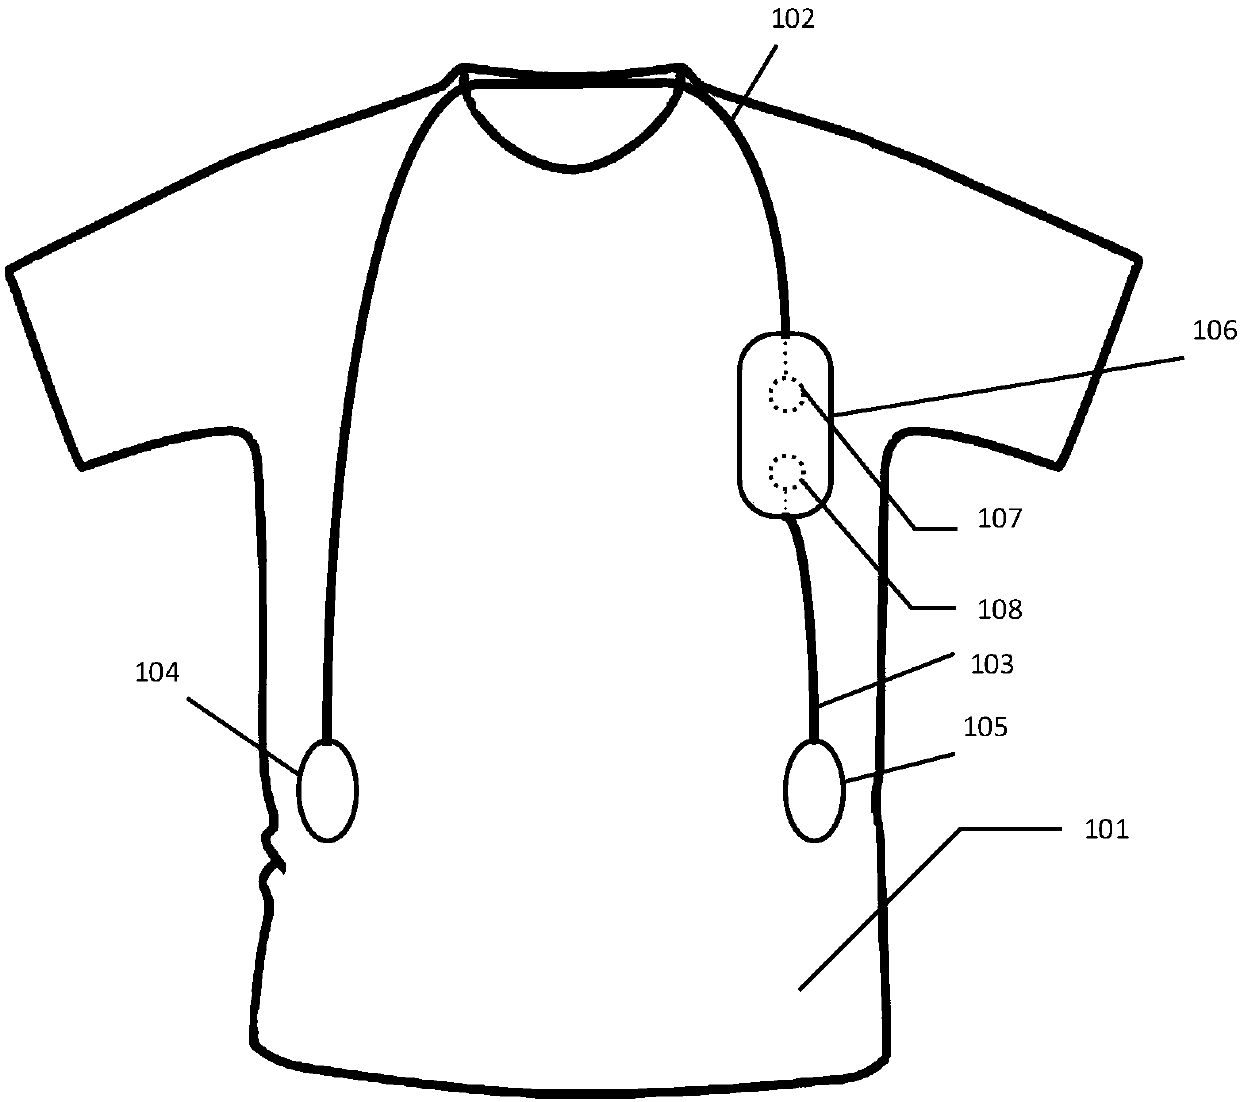 An ecg authentication smart clothing